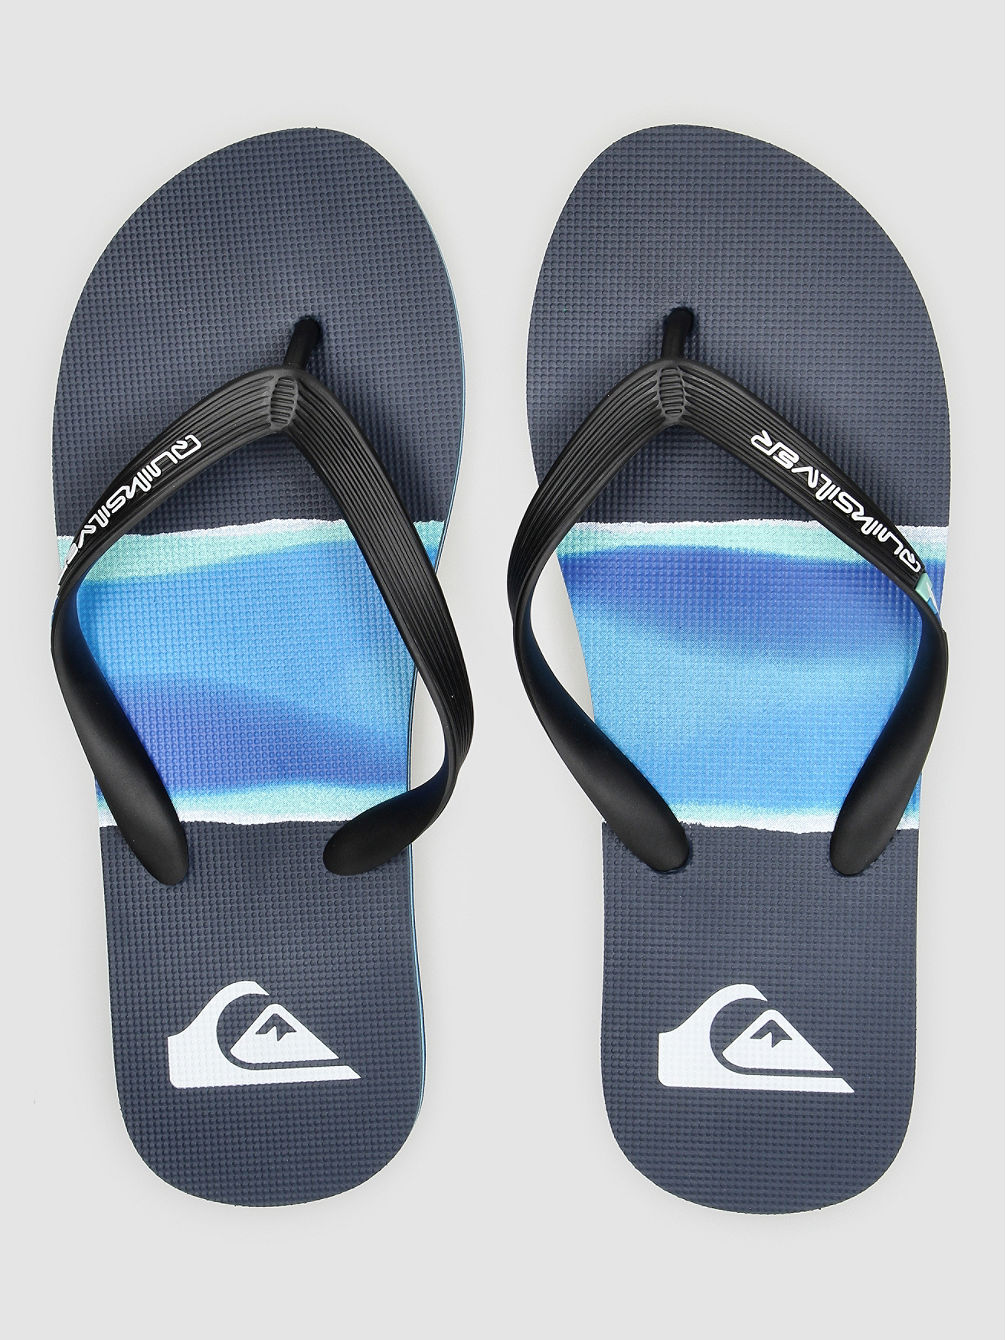 Molokai Airbrushed Sandals